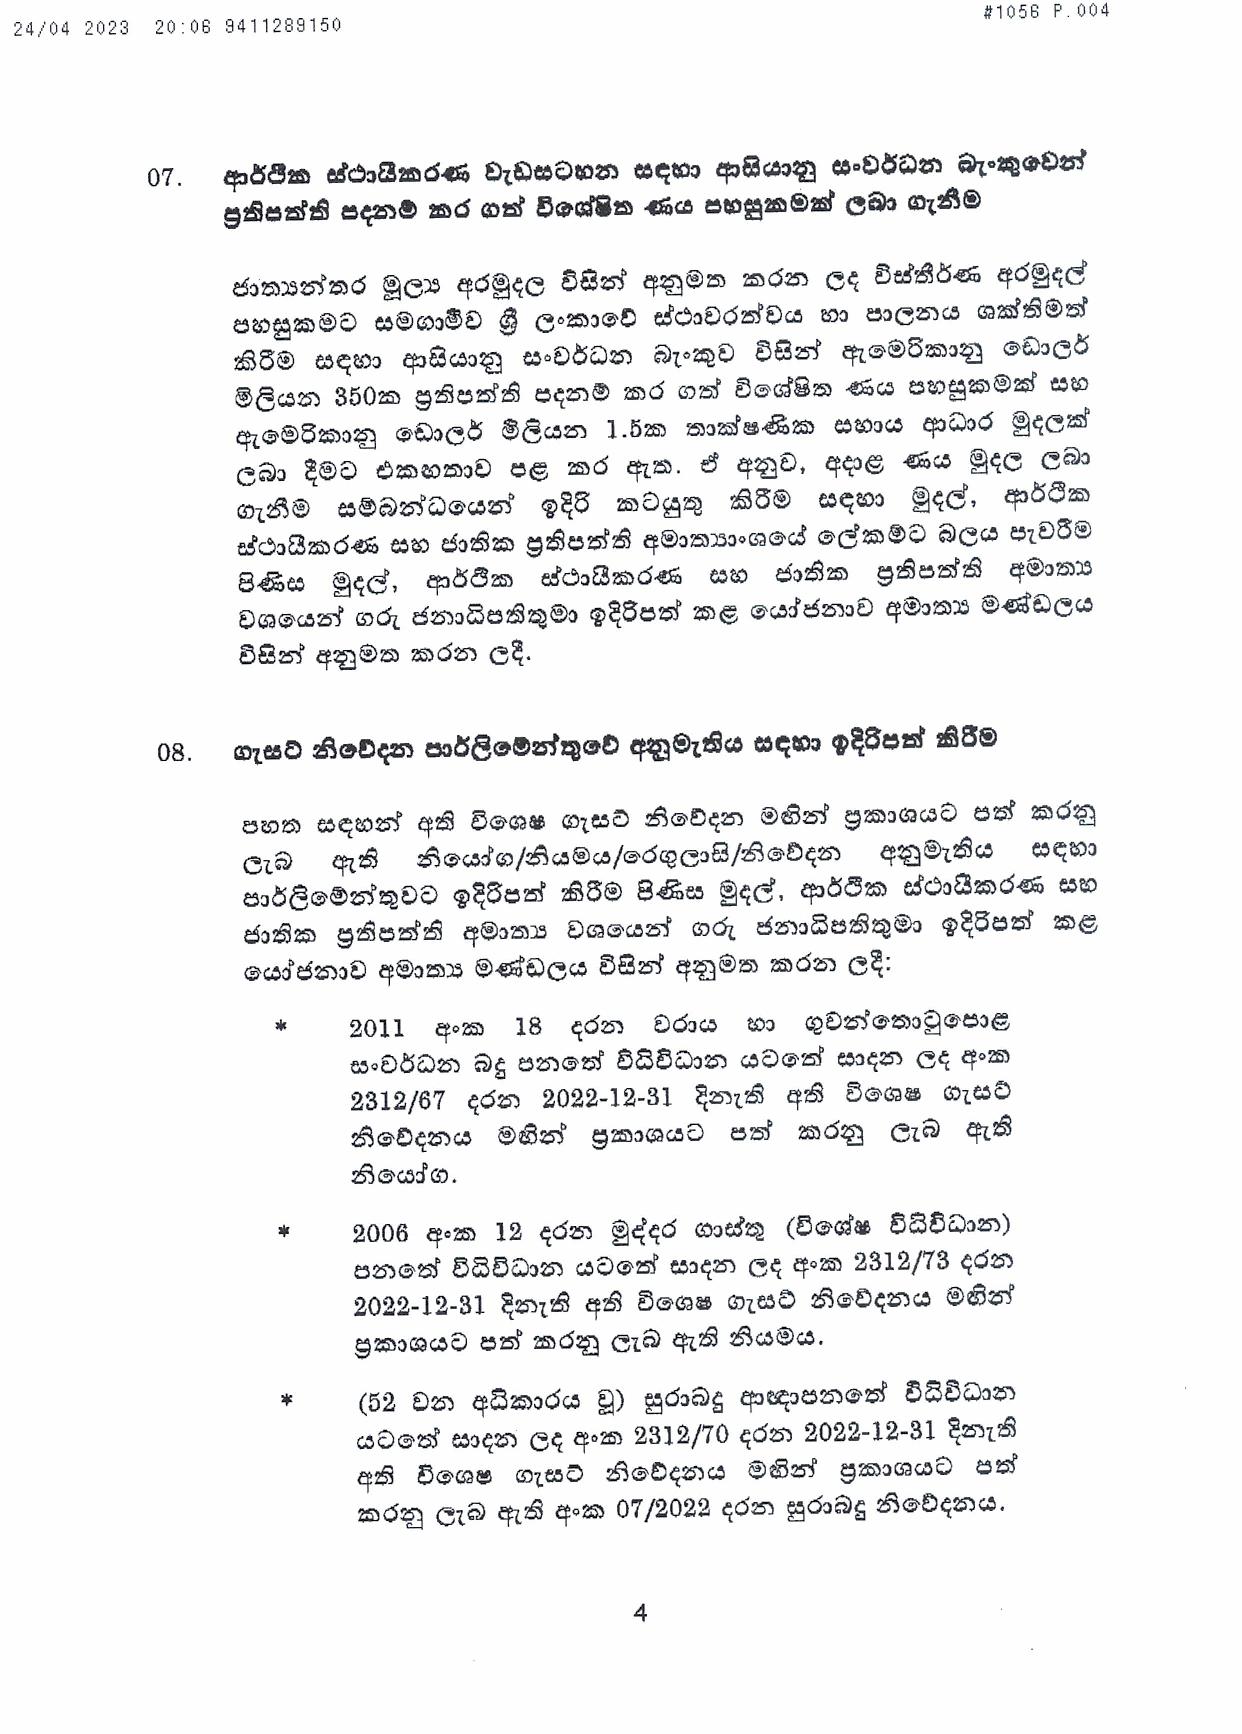 Cabinet Decision 2023.04.24 page 004